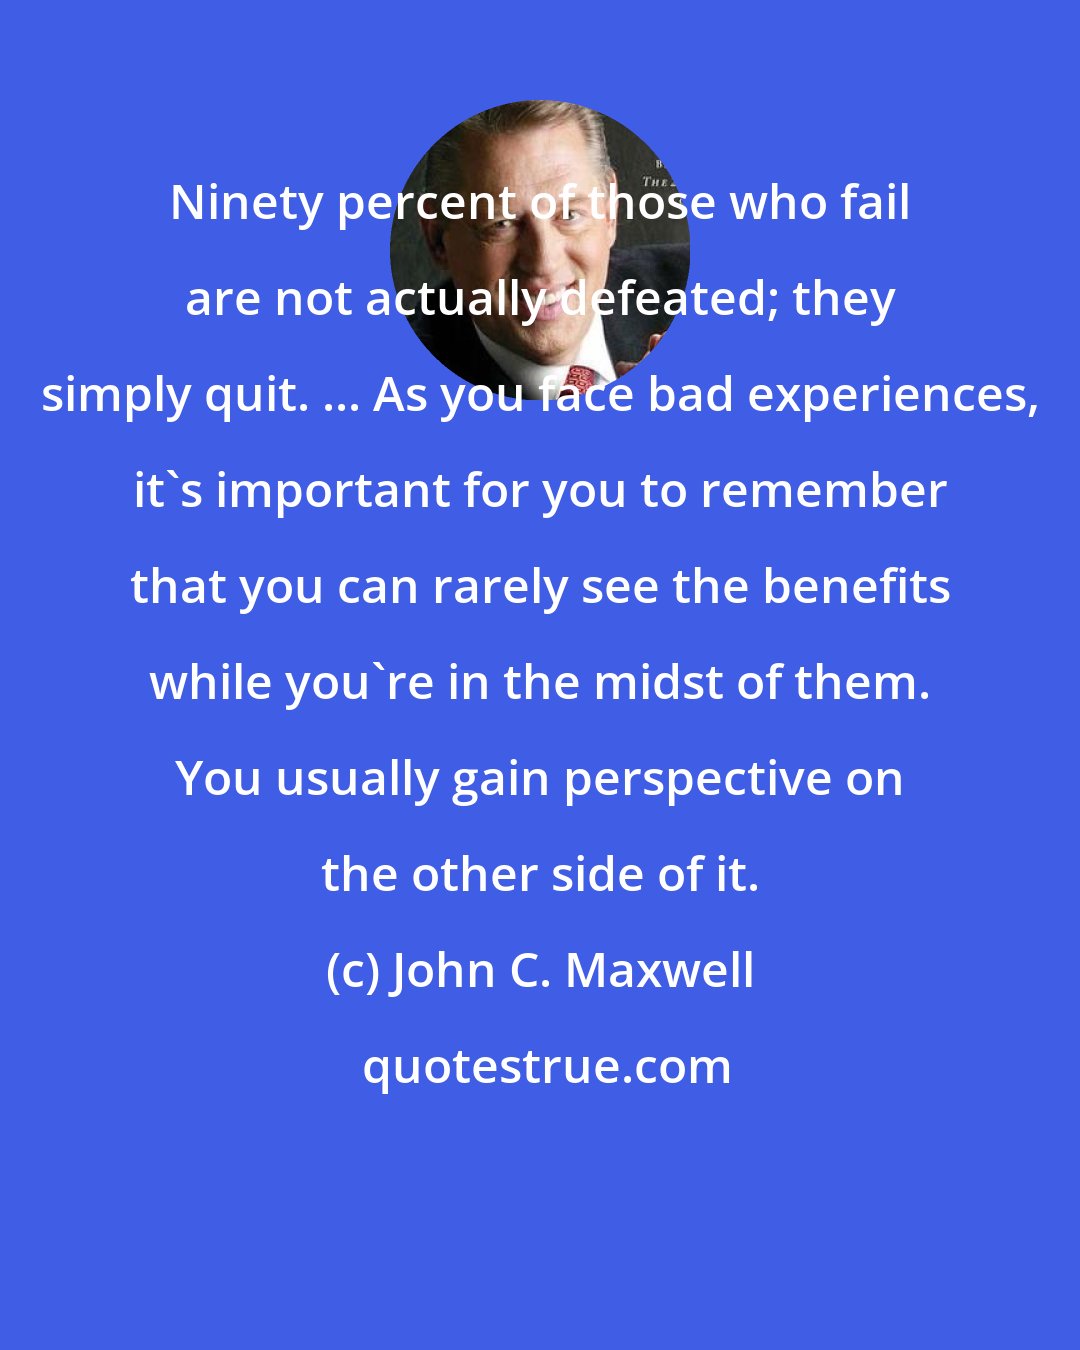 John C. Maxwell: Ninety percent of those who fail are not actually defeated; they simply quit. ... As you face bad experiences, it's important for you to remember that you can rarely see the benefits while you're in the midst of them. You usually gain perspective on the other side of it.